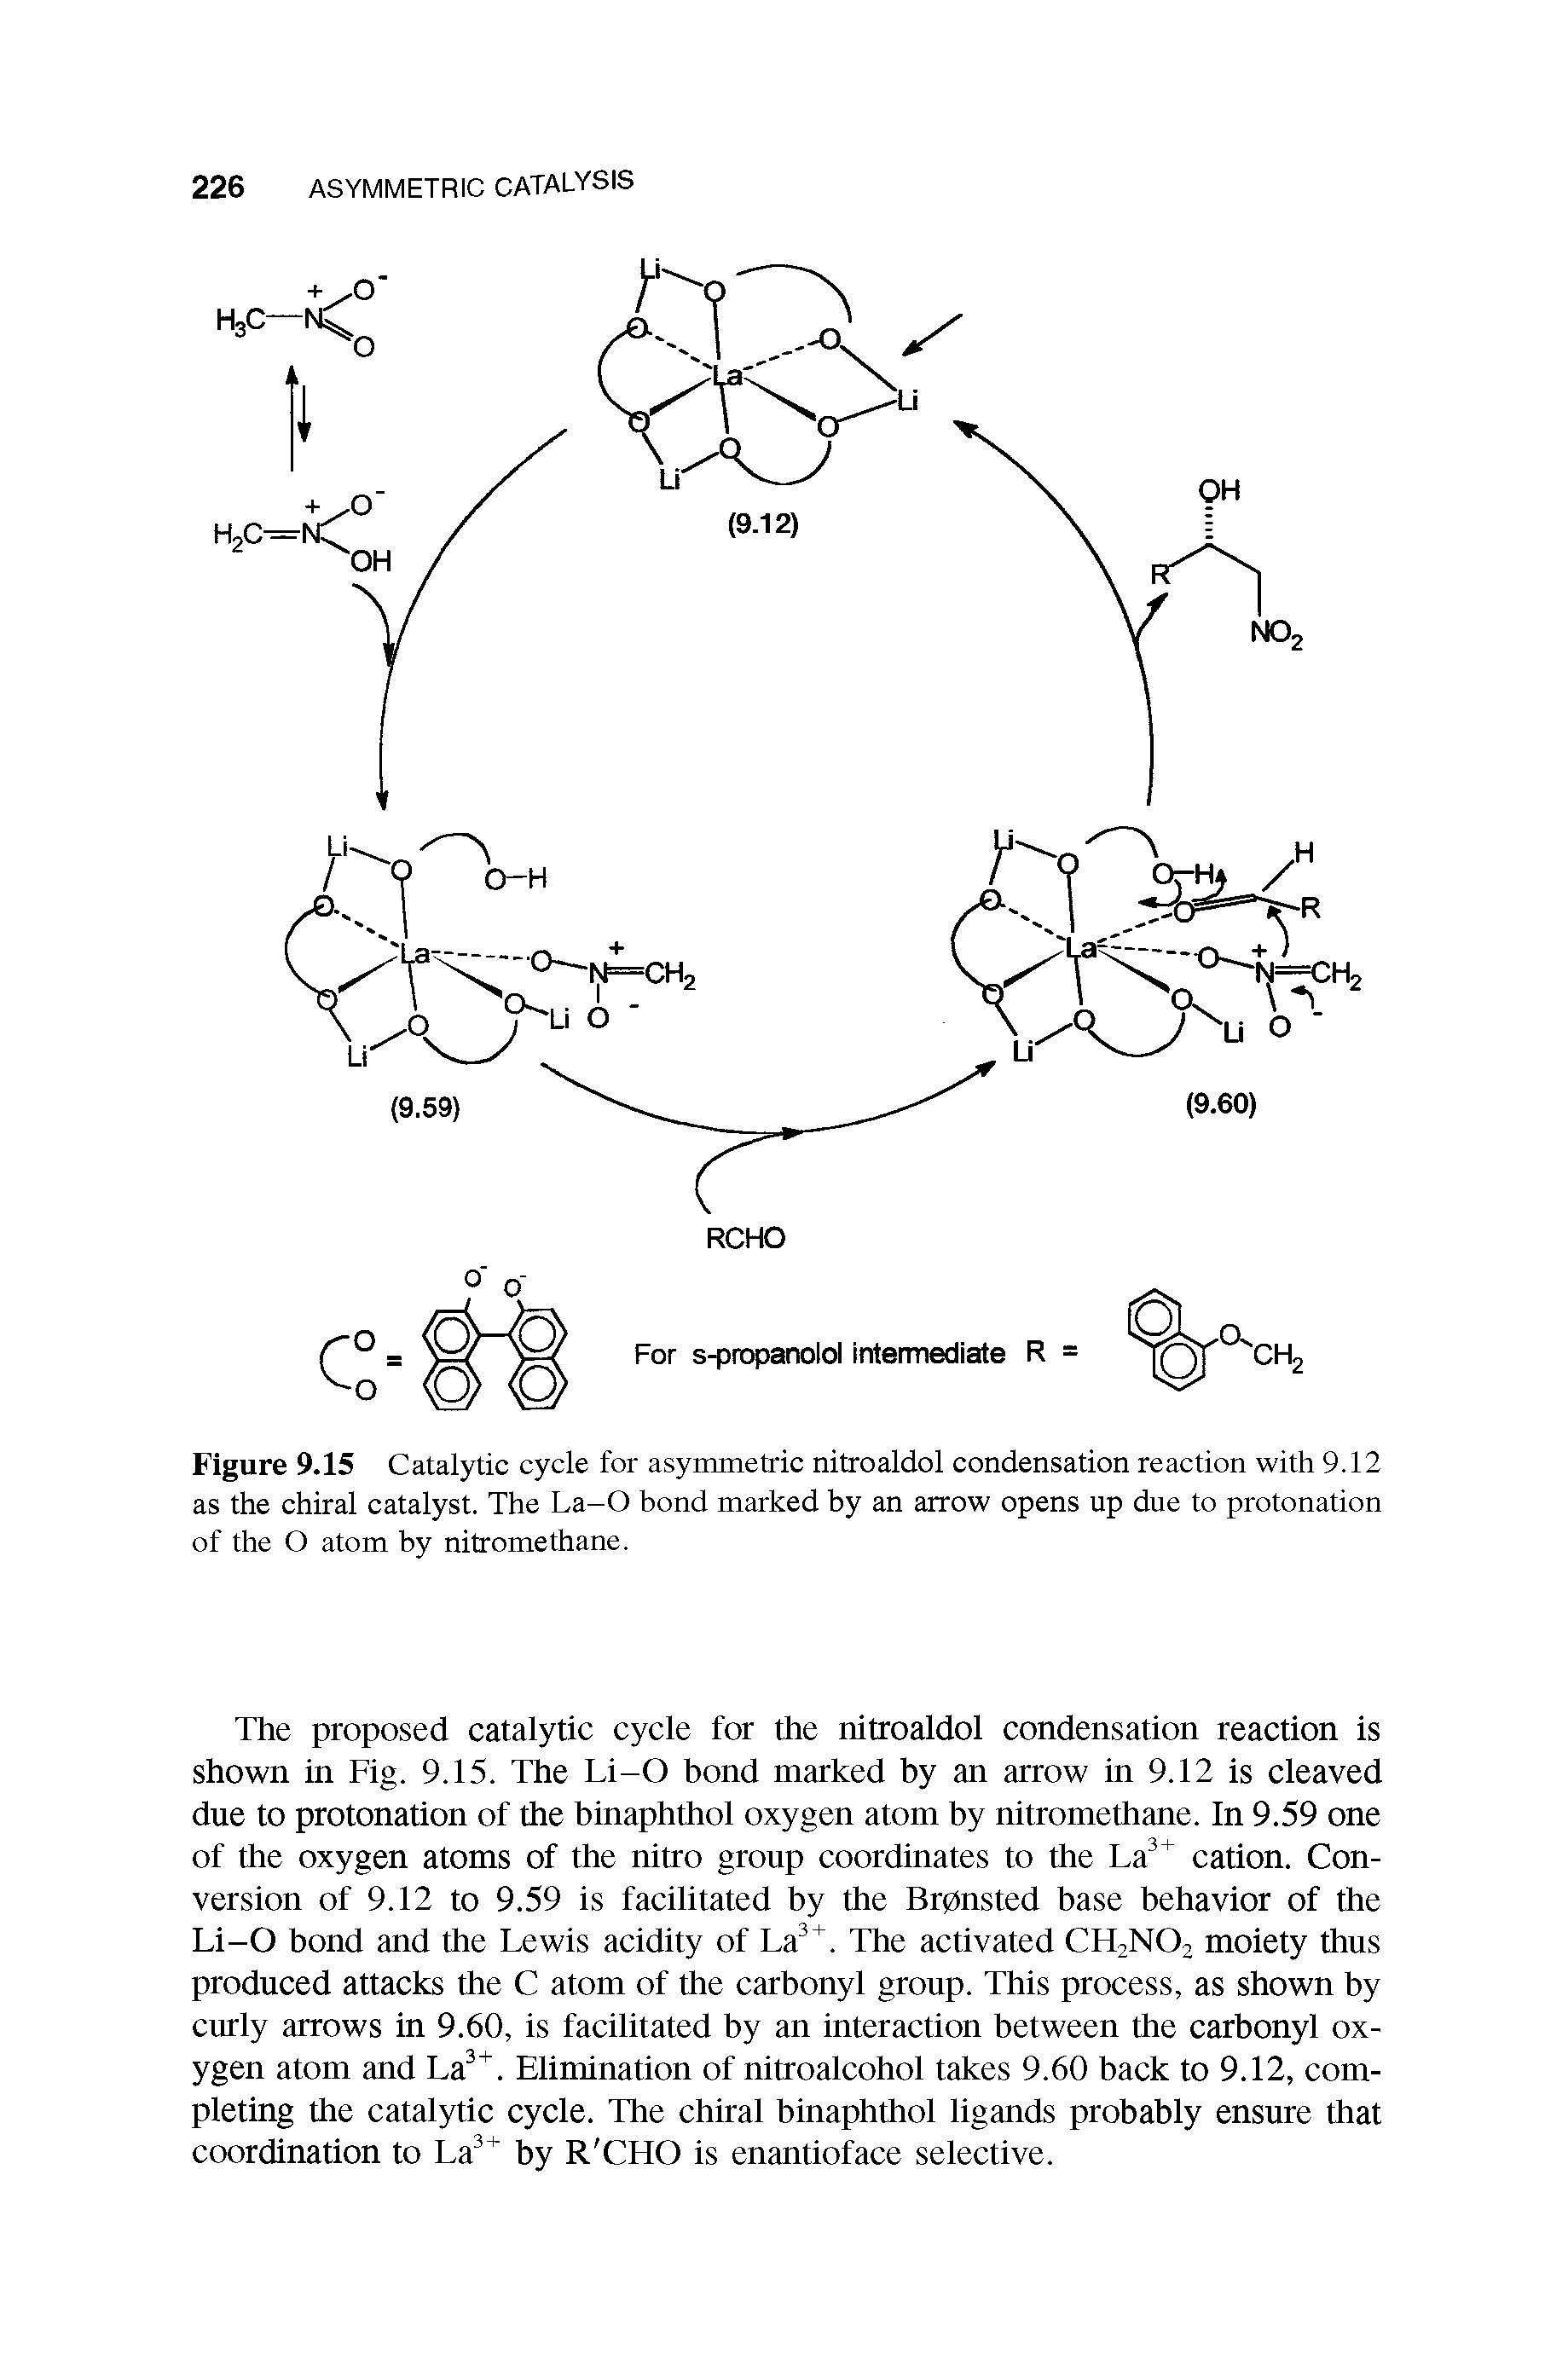 Figure 9.15 Catalytic cycle for asymmetric nitroaldol condensation reaction with 9.12 as the chiral catalyst. The La-O bond marked by an arrow opens up due to protonation of the O atom by nitromethane.